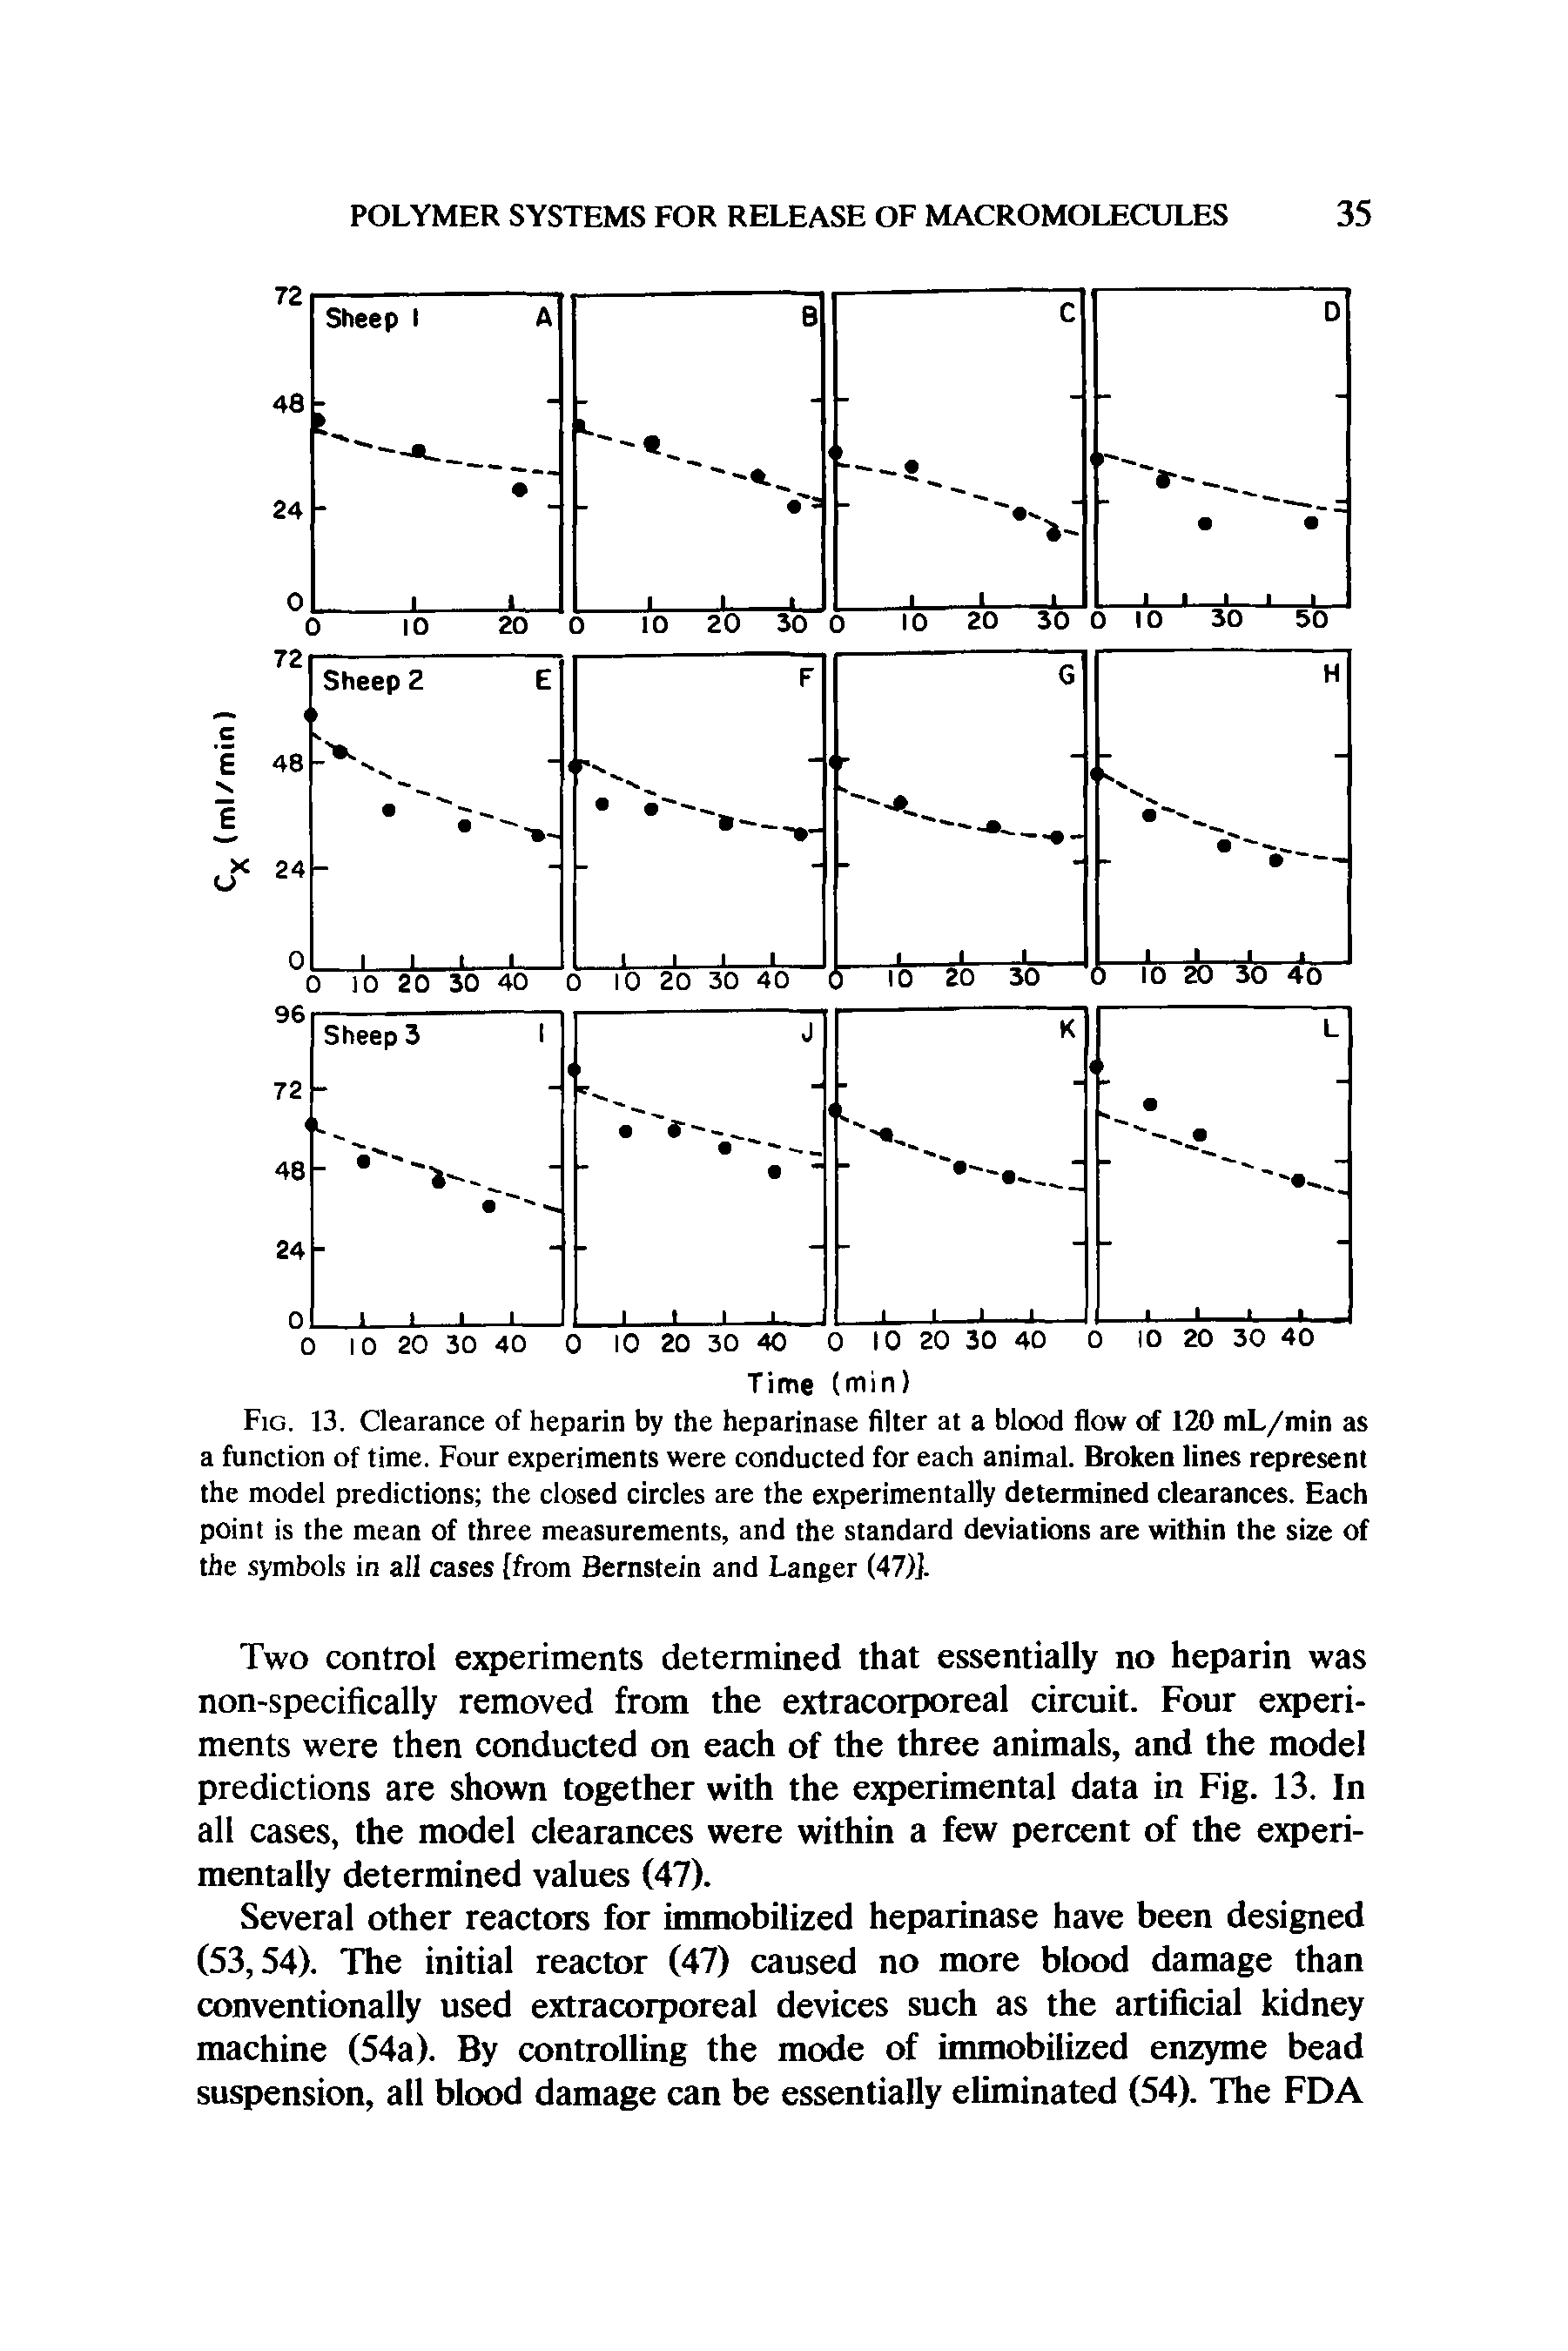 Fig. 13. Clearance of heparin by the heparinase filter at a blood flow of 120 mL/min as a function of time. Four experiments were conducted for each animal. Broken lines represent the model predictions the closed circles are the experimentally determined clearances. Each point is the mean of three measurements, and the standard deviations are within the size of the symbols in all cases [from Bernstein and Langer (47)].